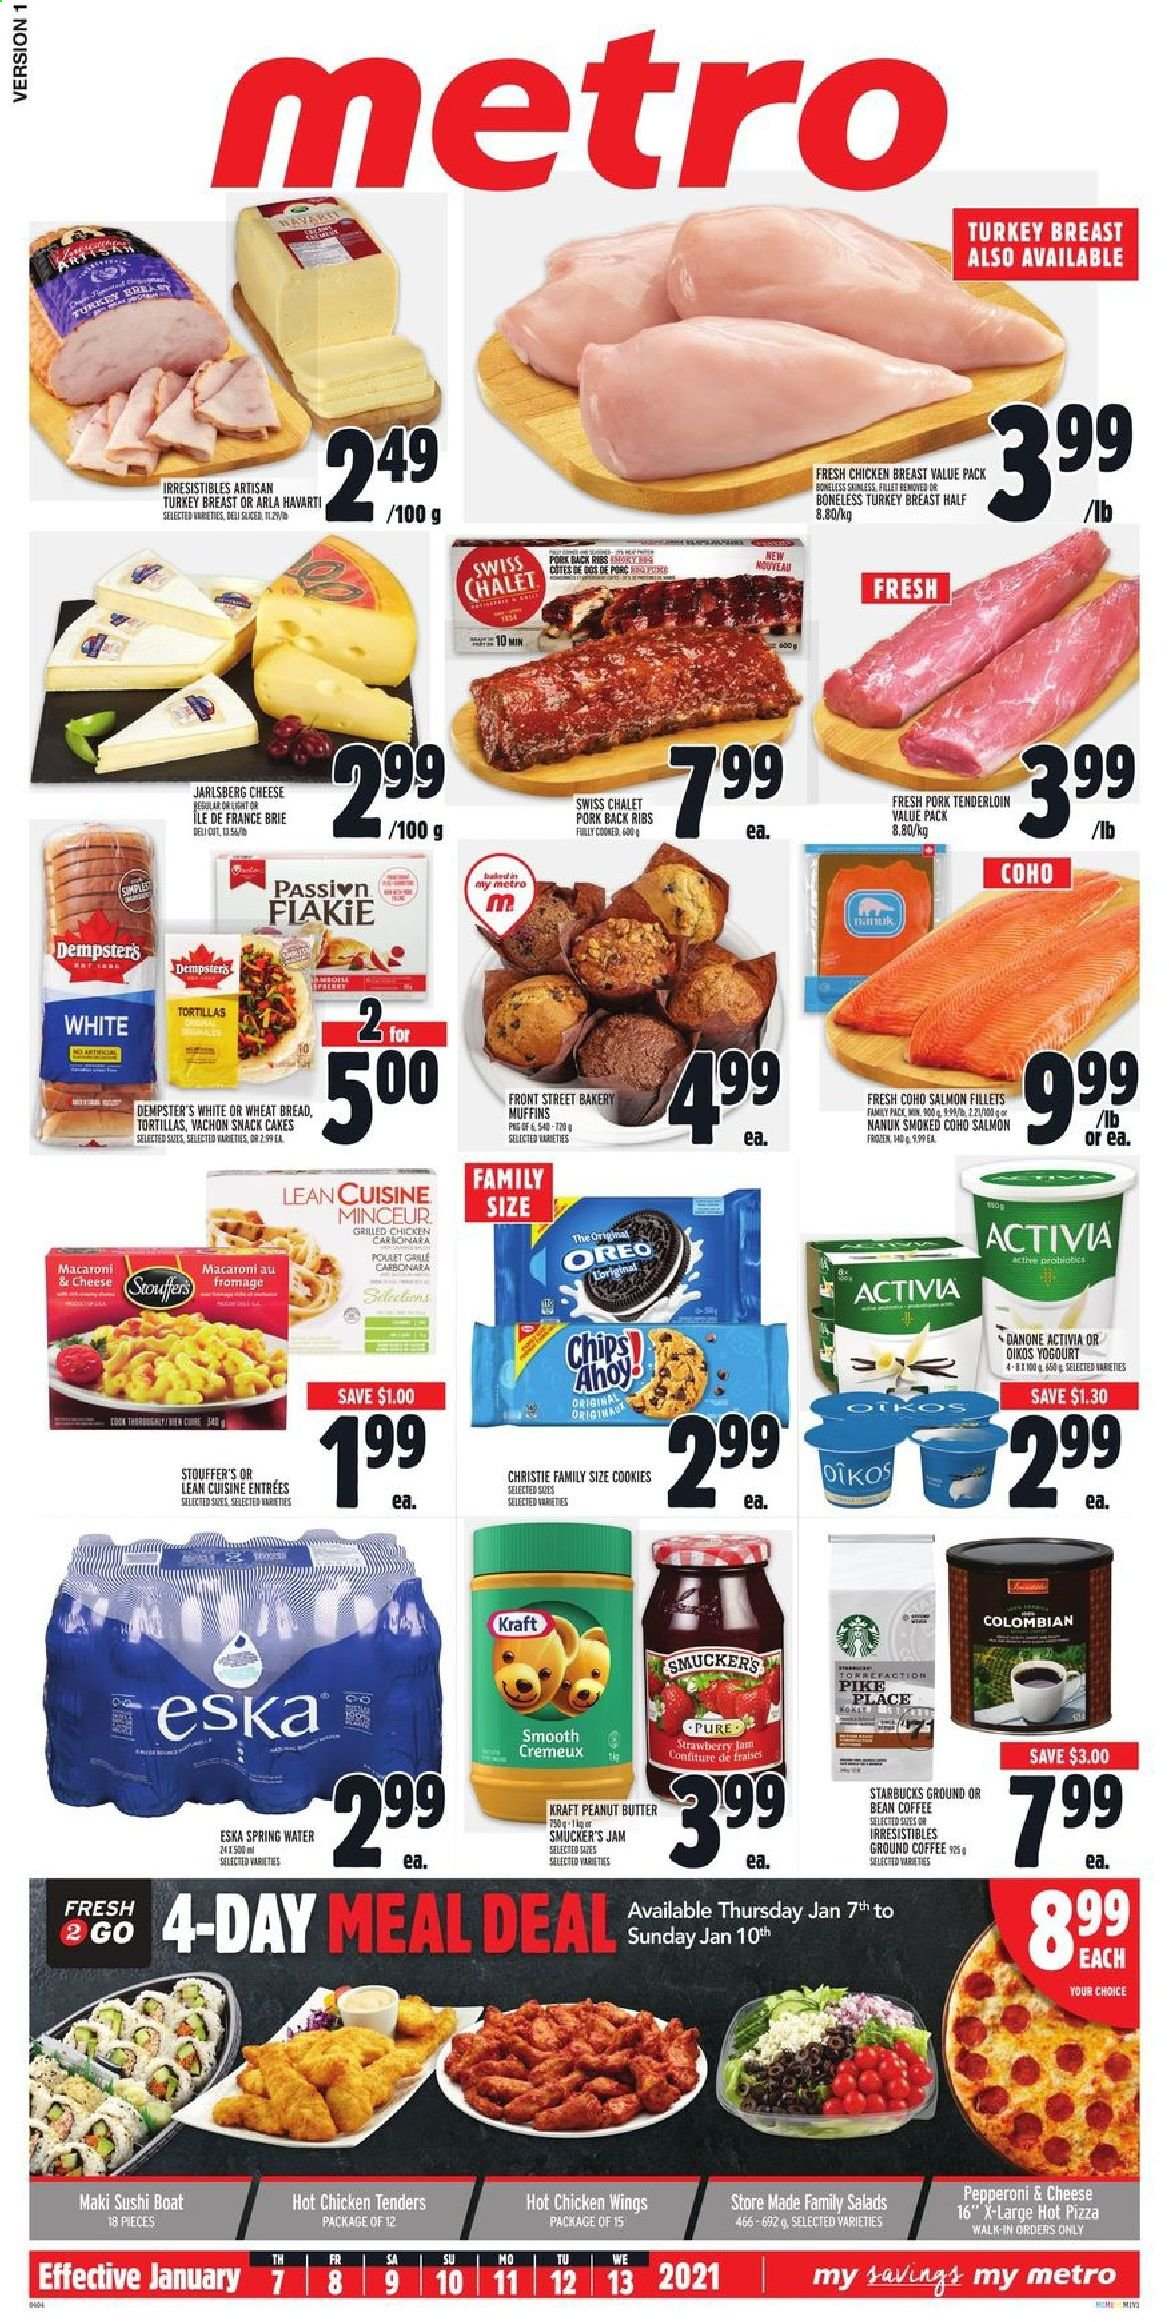 thumbnail - Metro Flyer - January 07, 2021 - January 13, 2021 - Sales products - tortillas, wheat bread, cake, muffin, salmon, salmon fillet, pizza, chicken tenders, macaroni, Lean Cuisine, Kraft®, Havarti, brie, Arla, Activia, Oikos, chicken wings, Stouffer's, cookies, snack, strawberry jam, fruit jam, peanut butter, spring water, coffee, ground coffee, Starbucks, turkey breast, chicken breasts, chicken, turkey, pork meat, pork ribs, pork back ribs, Oreo, Danone. Page 1.